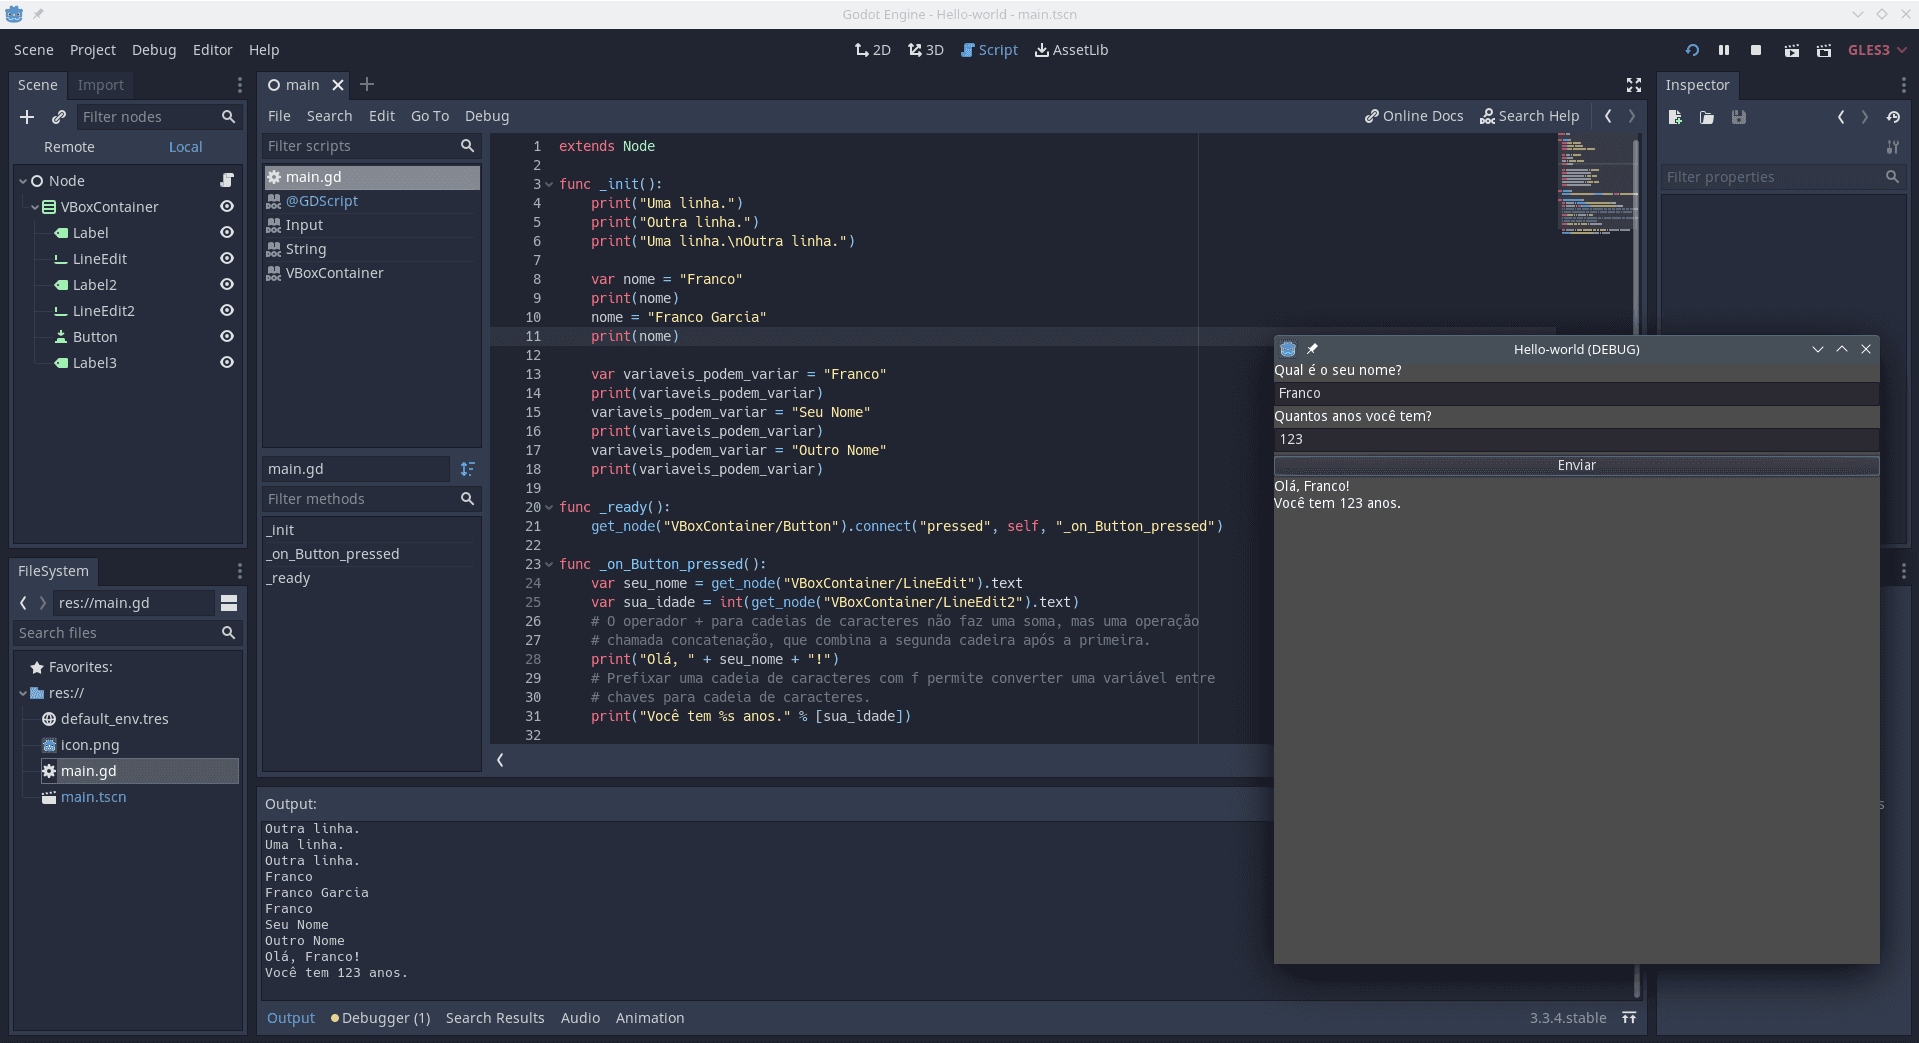 Examples of GDScript code snippets presented in the page running on Godot Engine.